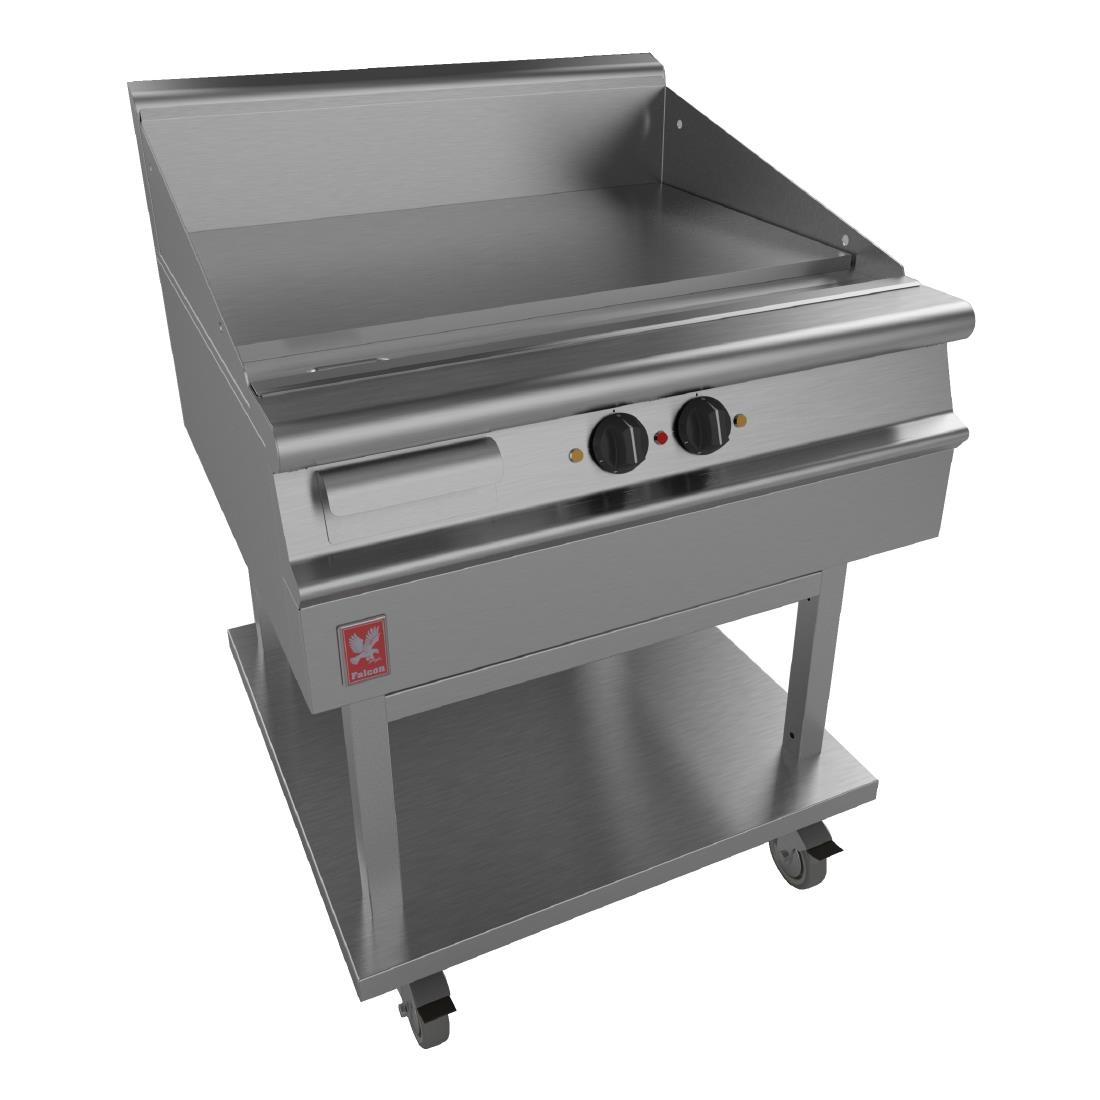 Falcon Dominator Plus 800mm Wide Smooth Griddle on Mobile Stand E3481 - GP106  - 1